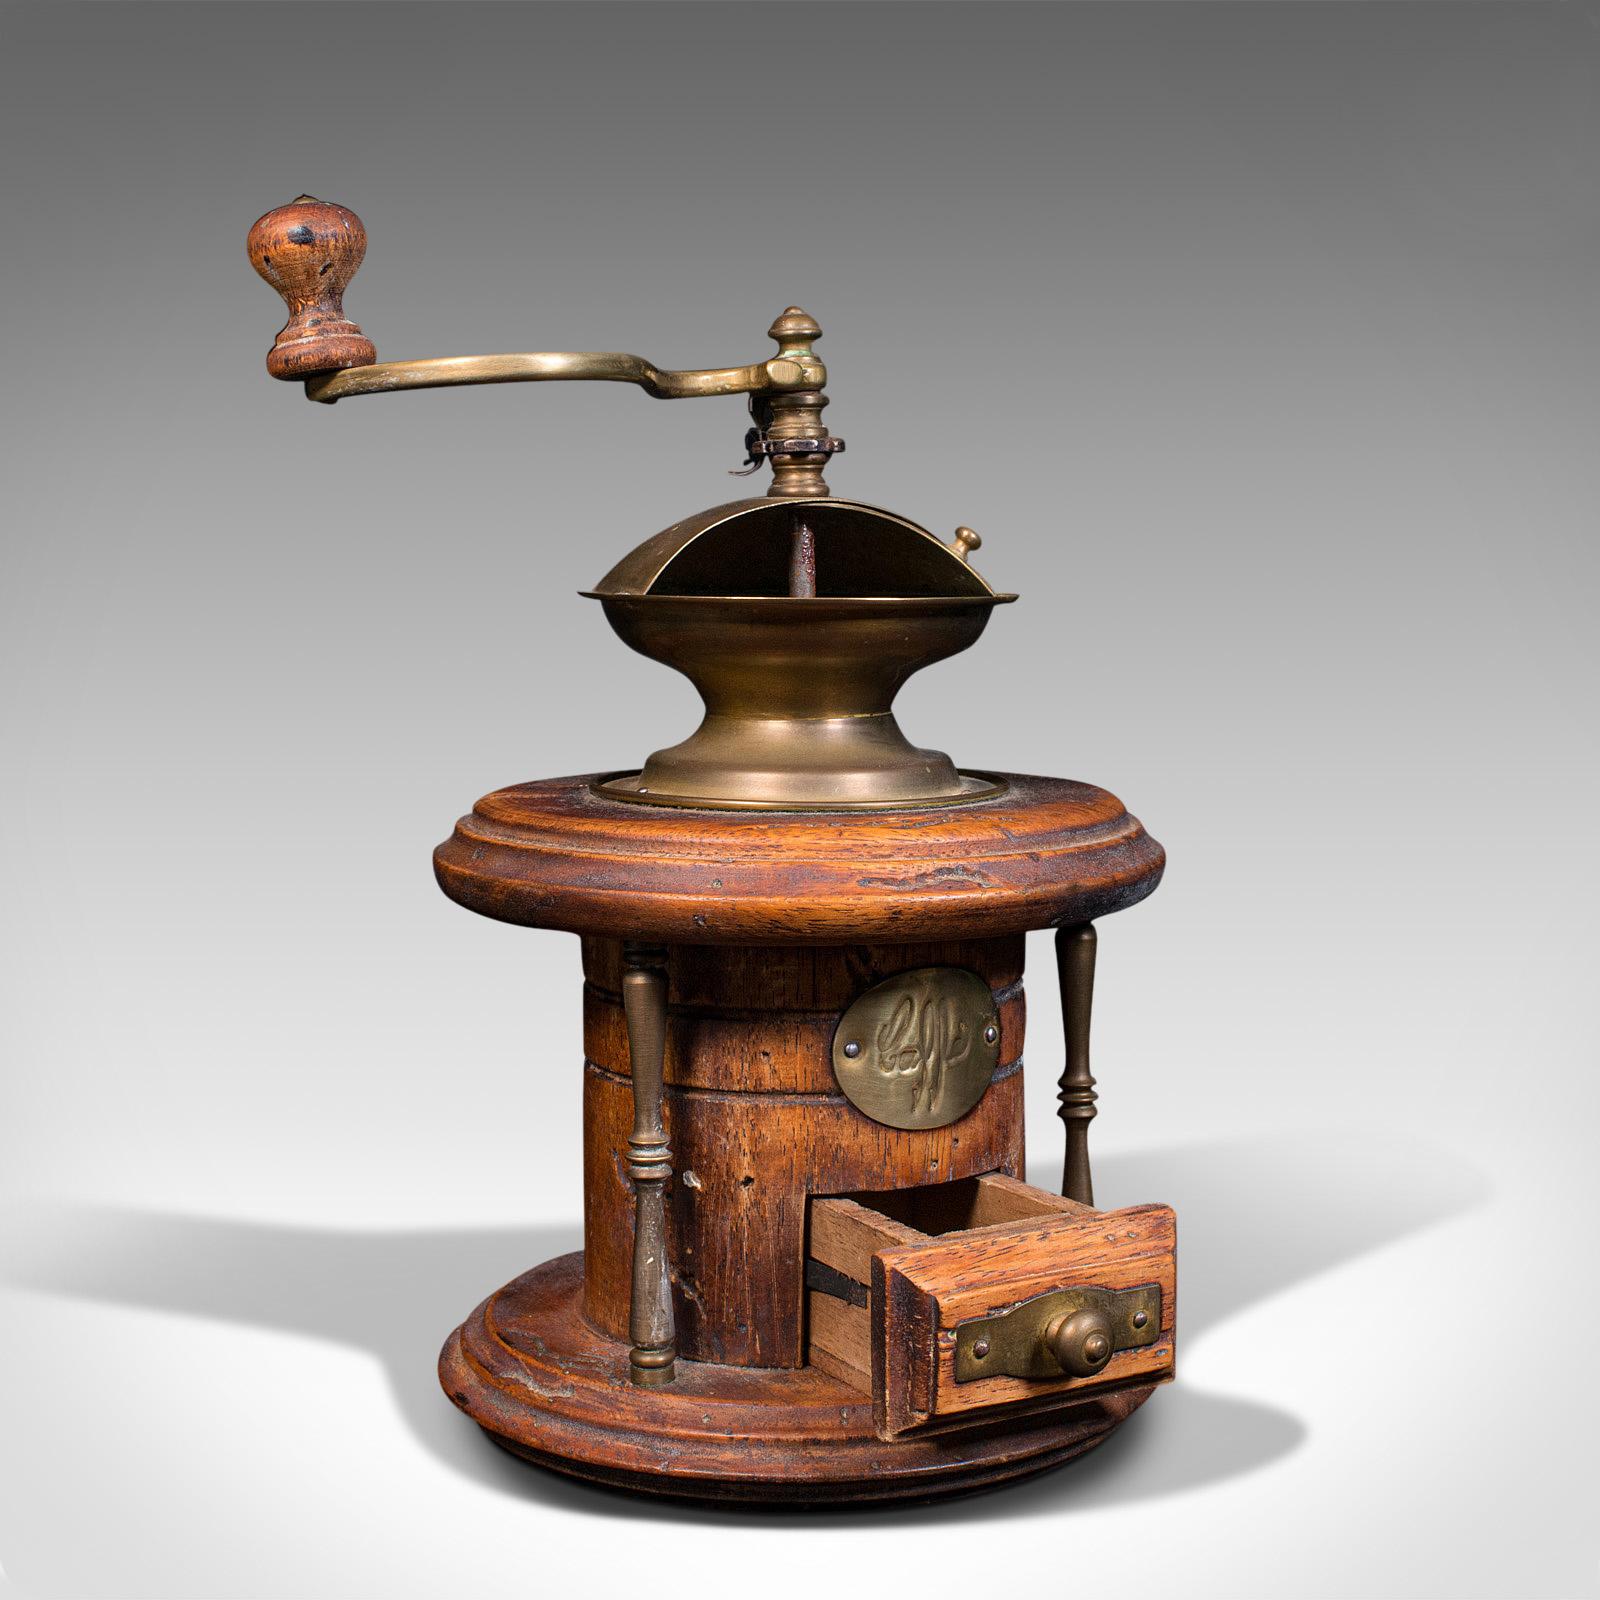 This is a vintage manual coffee grinder. A Continental, fruitwood rotary coffee bean mill, dating to the mid 20th century, circa 1940.

Wonderfully mechanical, ideal for decorative display
Presenting a desirable aged patina throughout
Fruitwood